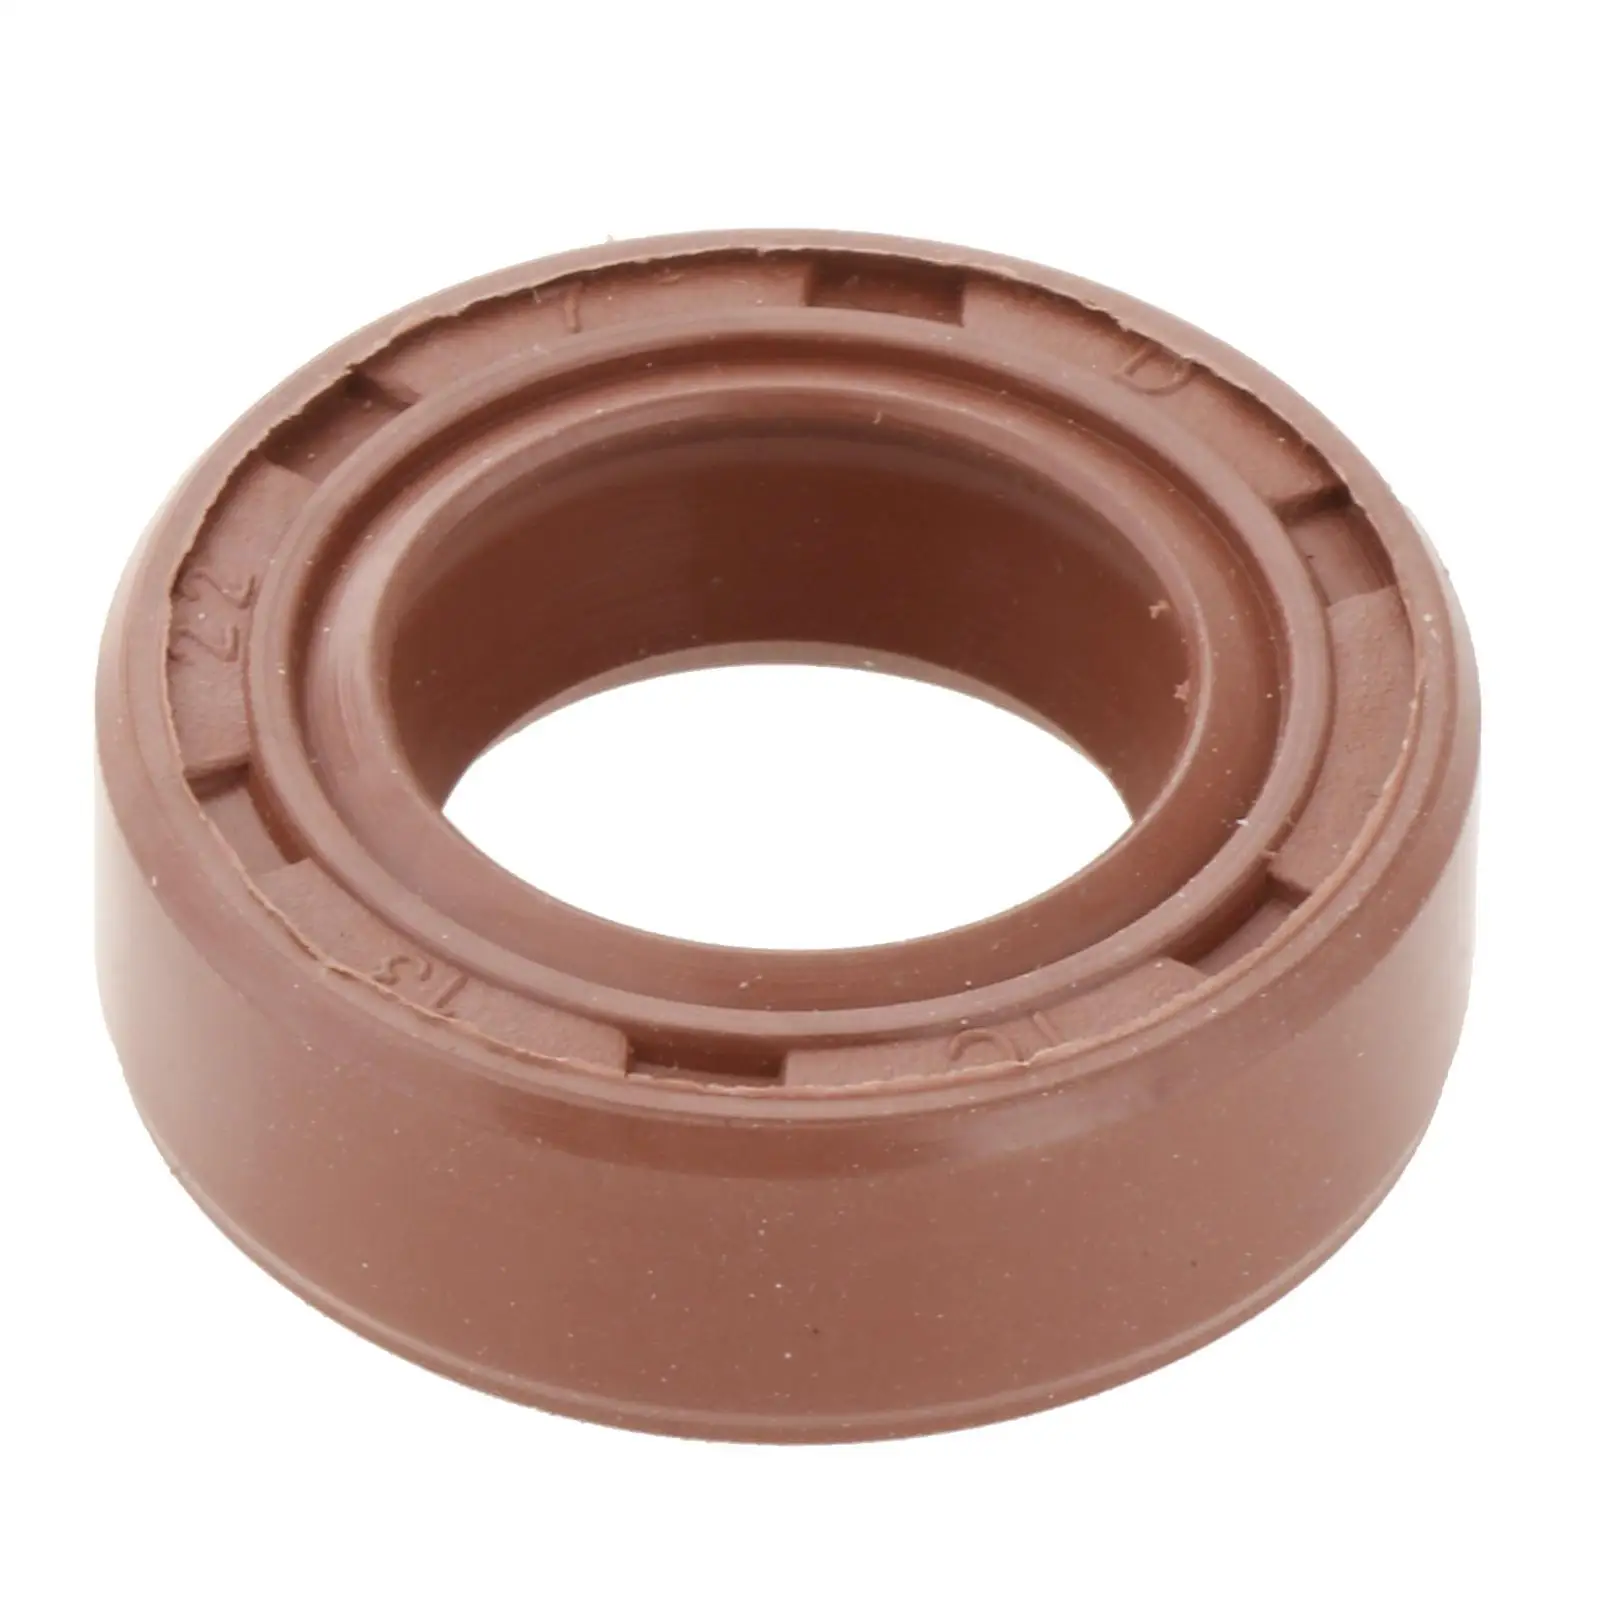 93101-13M12 933-0600423-00 9310113M12 Replaces Oil Seal for 